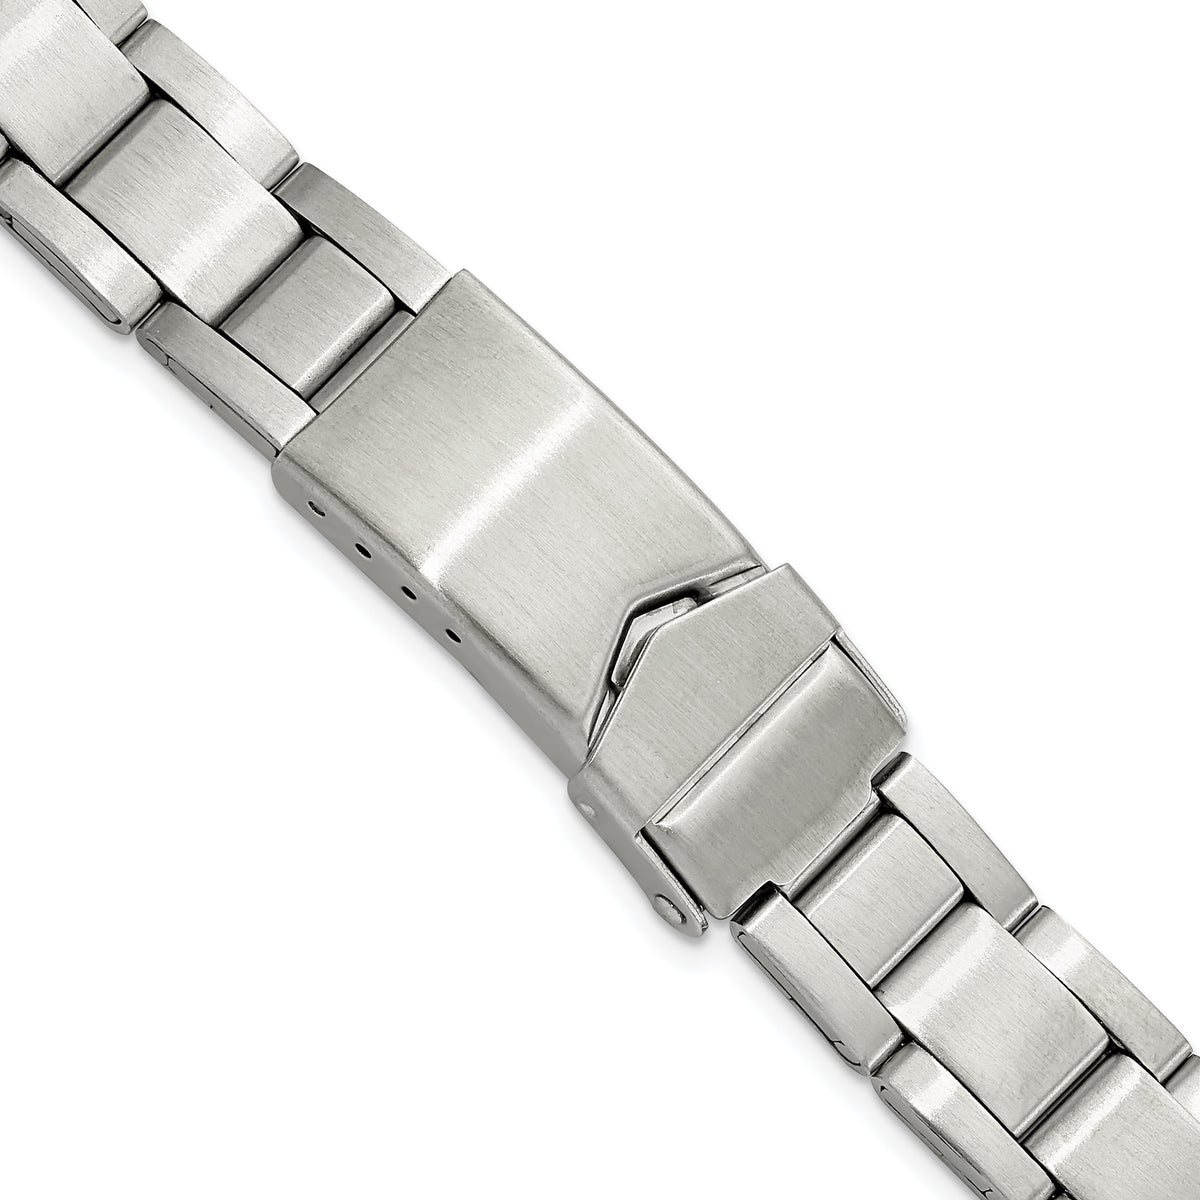 DeBeer 11-14mm Ladies Satin Stainless Steel Oyster-Style with Deployment Buckle 6.75 inch Watch Band